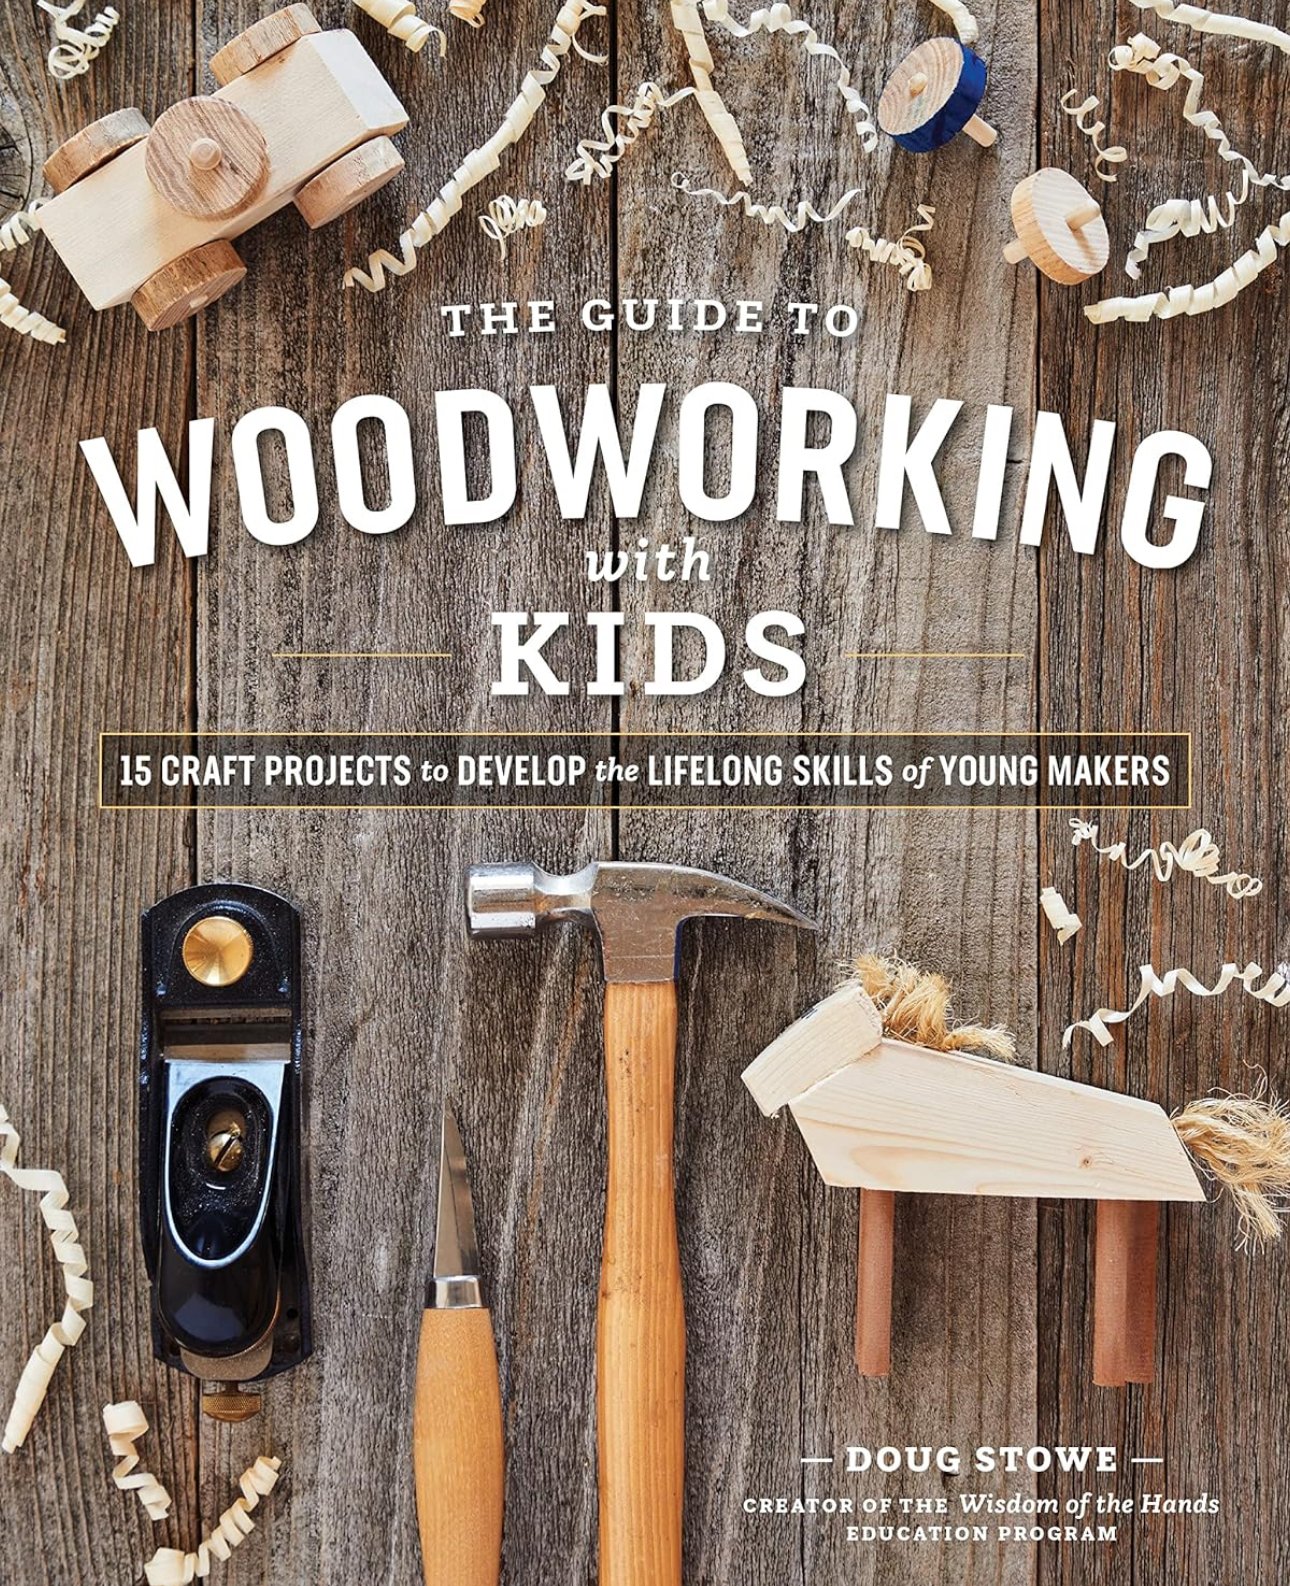 Woodworking with Kids by Doug Stowe